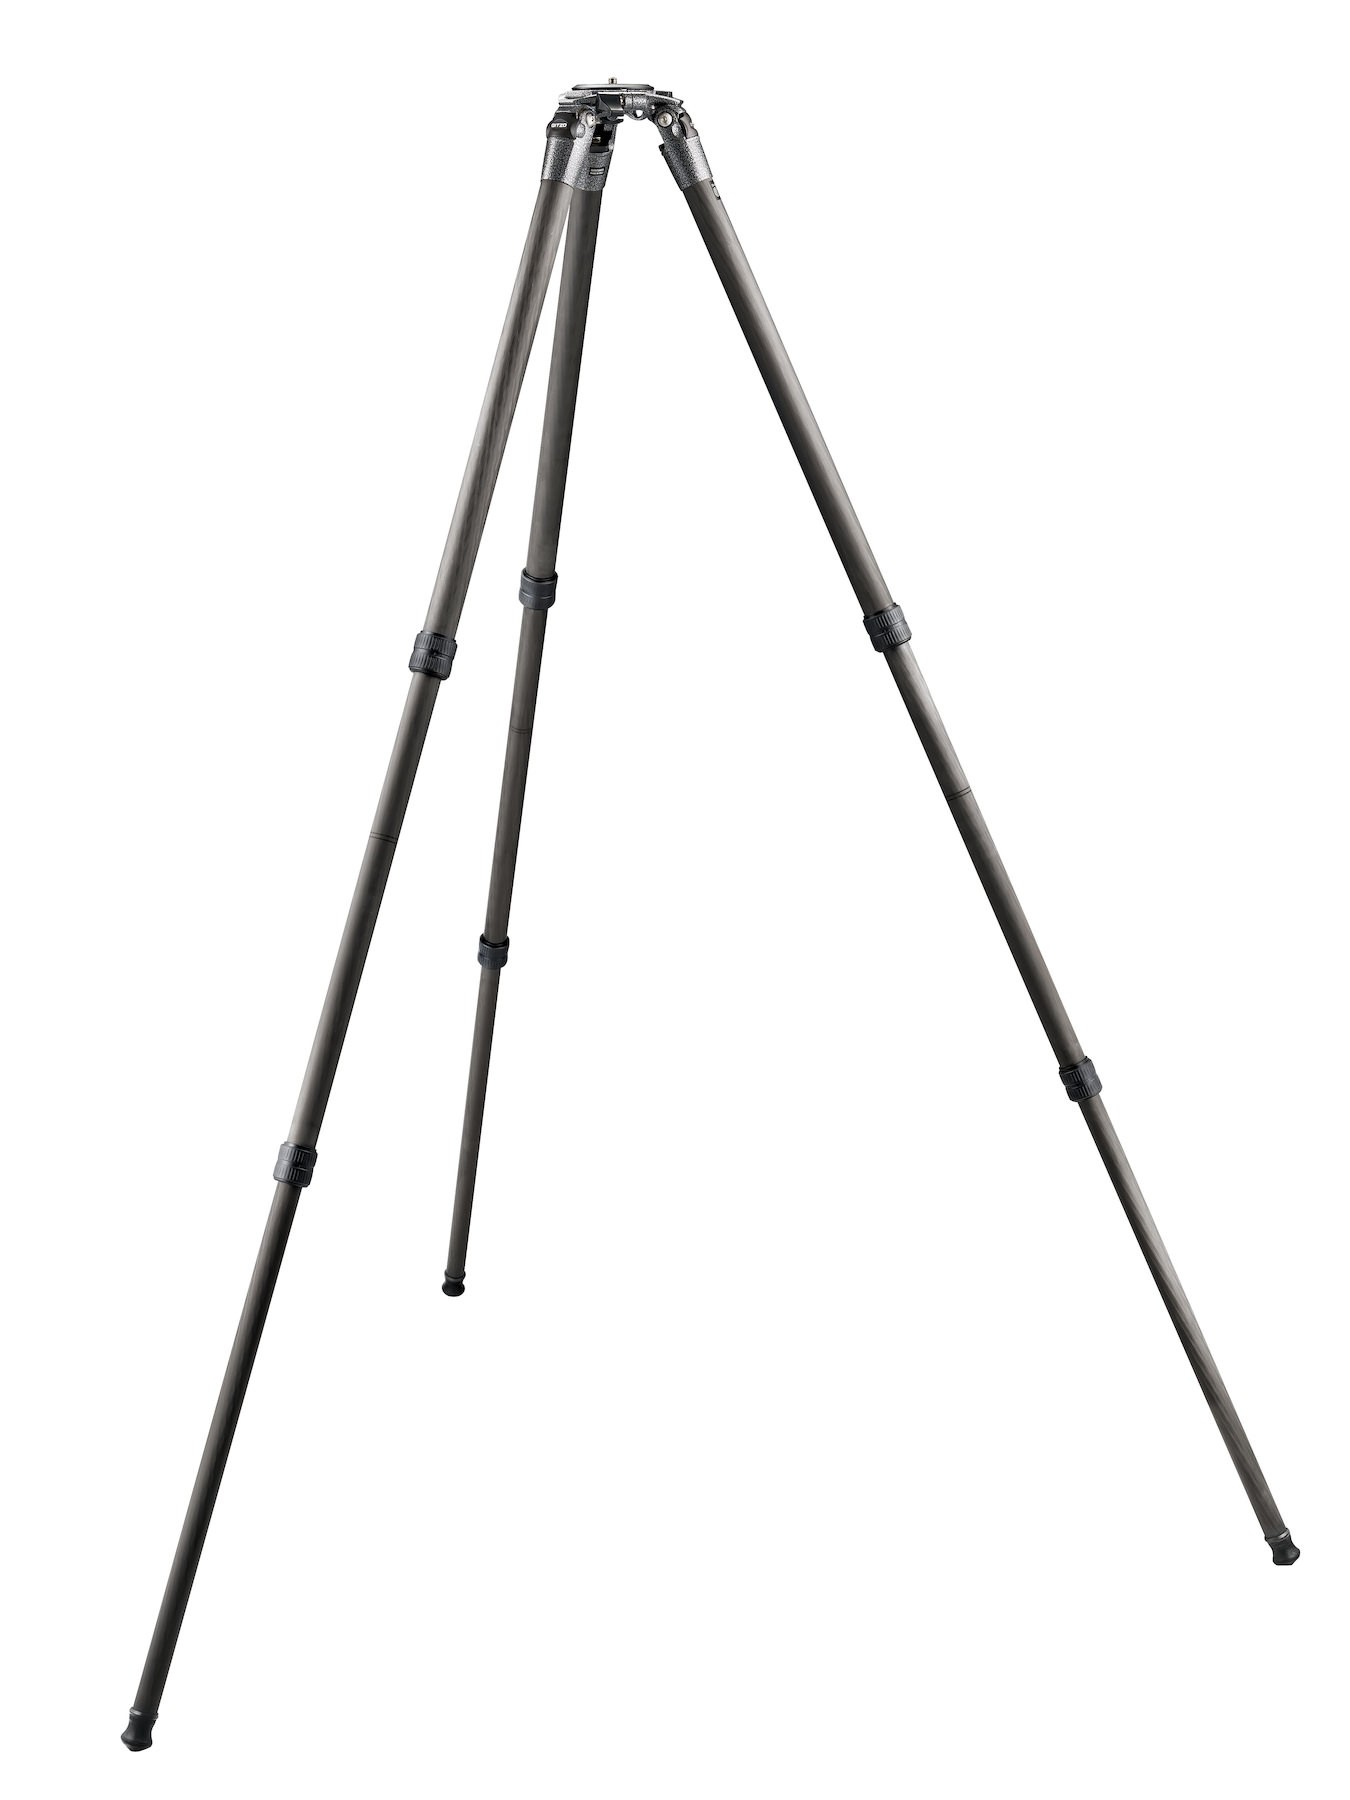 SYSTEMATIC Series 3 carbon tripod, 3-section, compact level